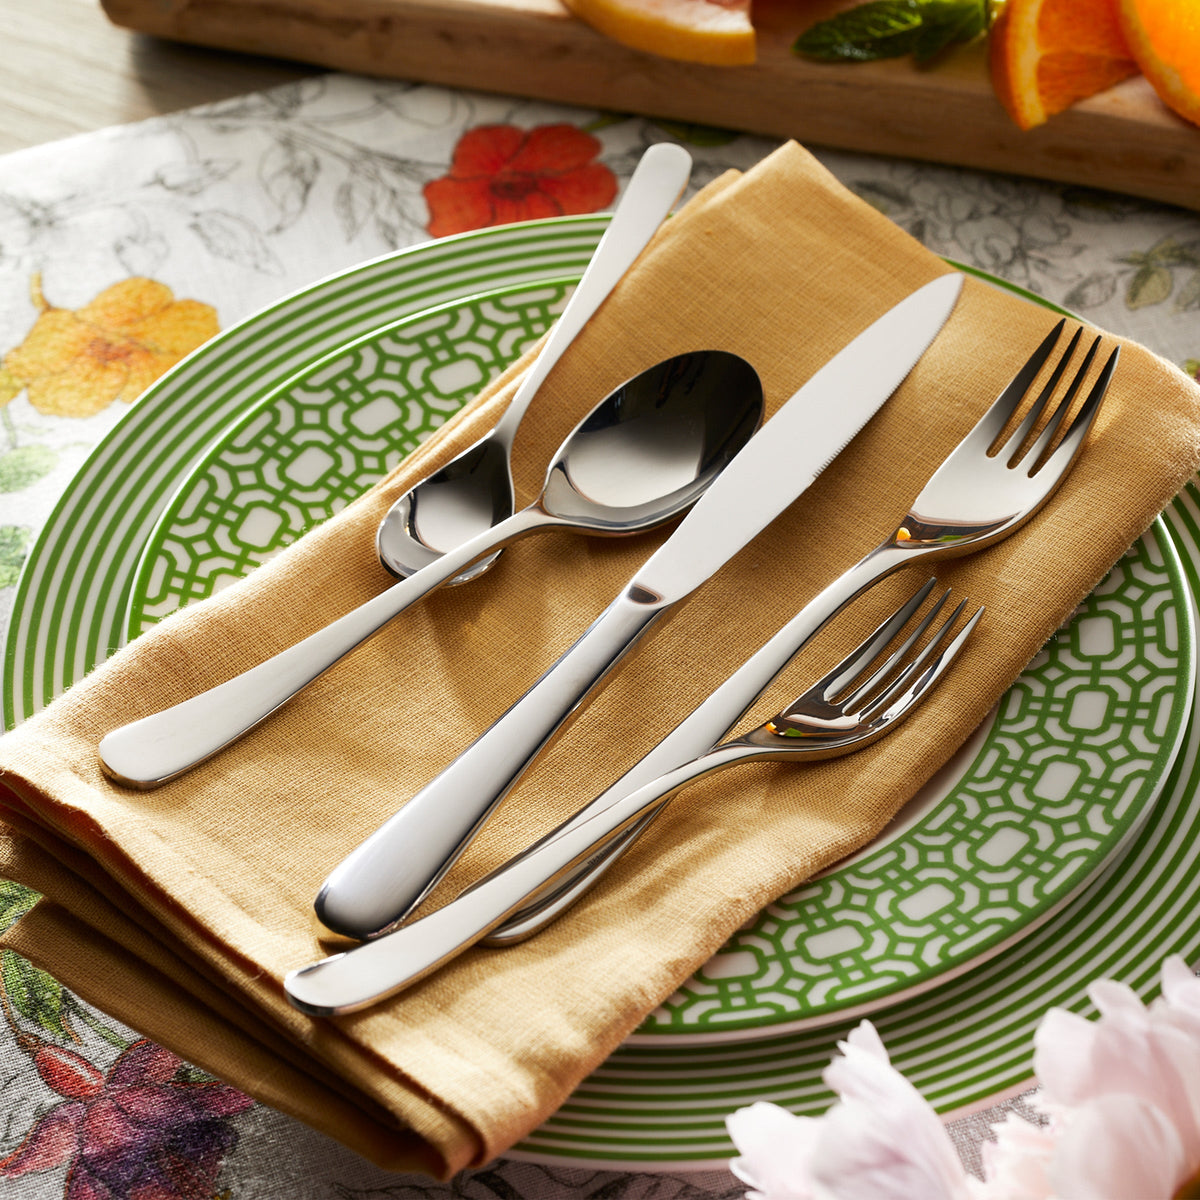 A La Mer 5-Piece Flatware Setting with a polished finish on a green plate in an elegant Degrenne setting.